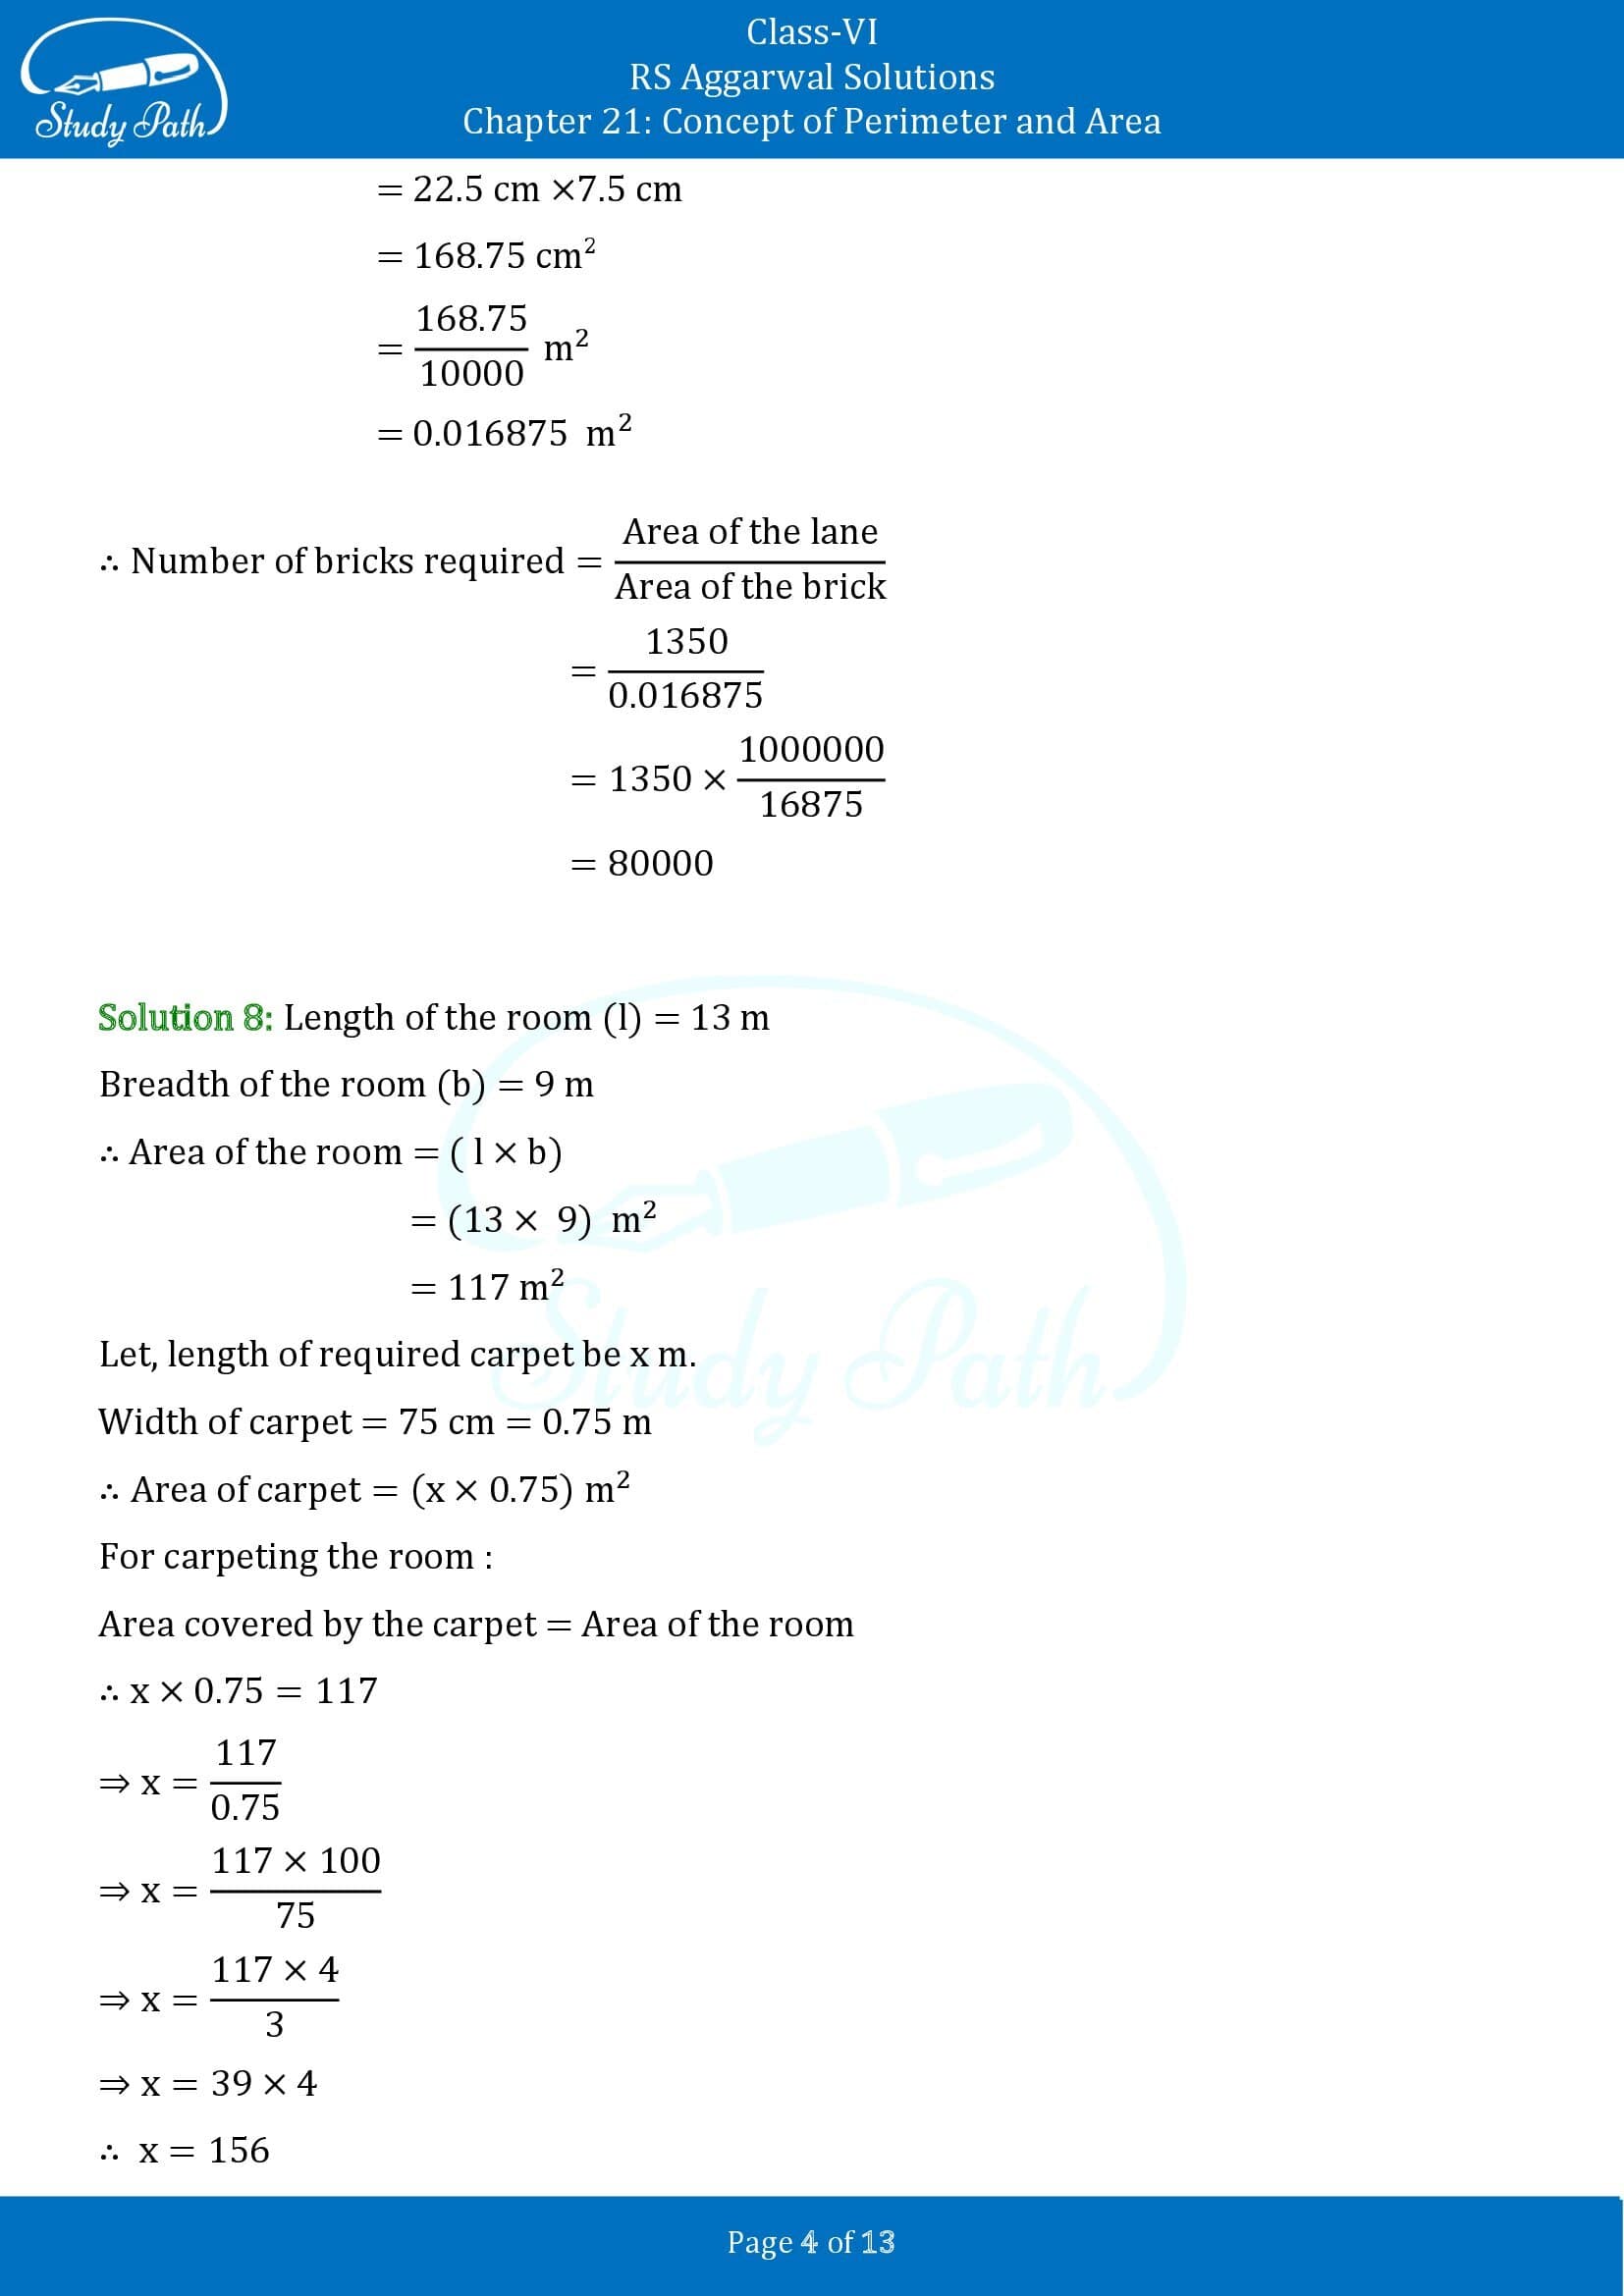 RS Aggarwal Solutions Class 6 Chapter 21 Concept of Perimeter and Area Exercise 21D 00004